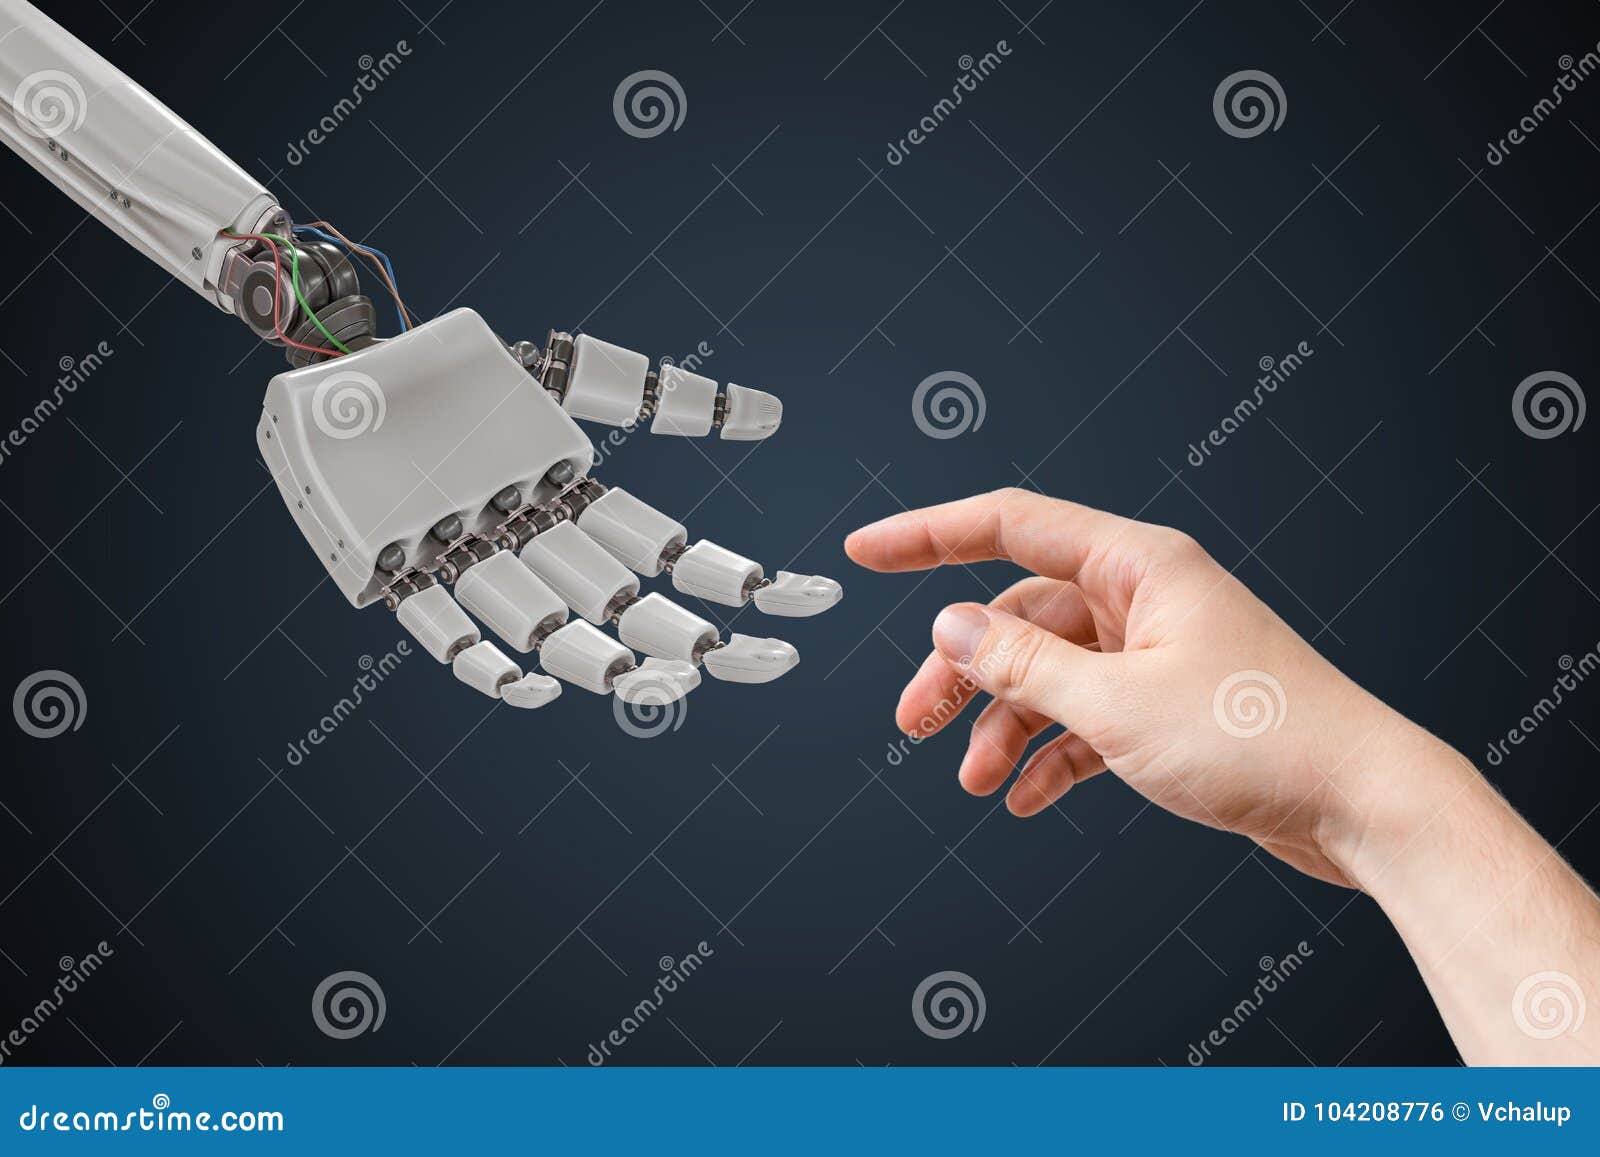 Robot Hand And Human Hand Are Touching Artificial Intelligence